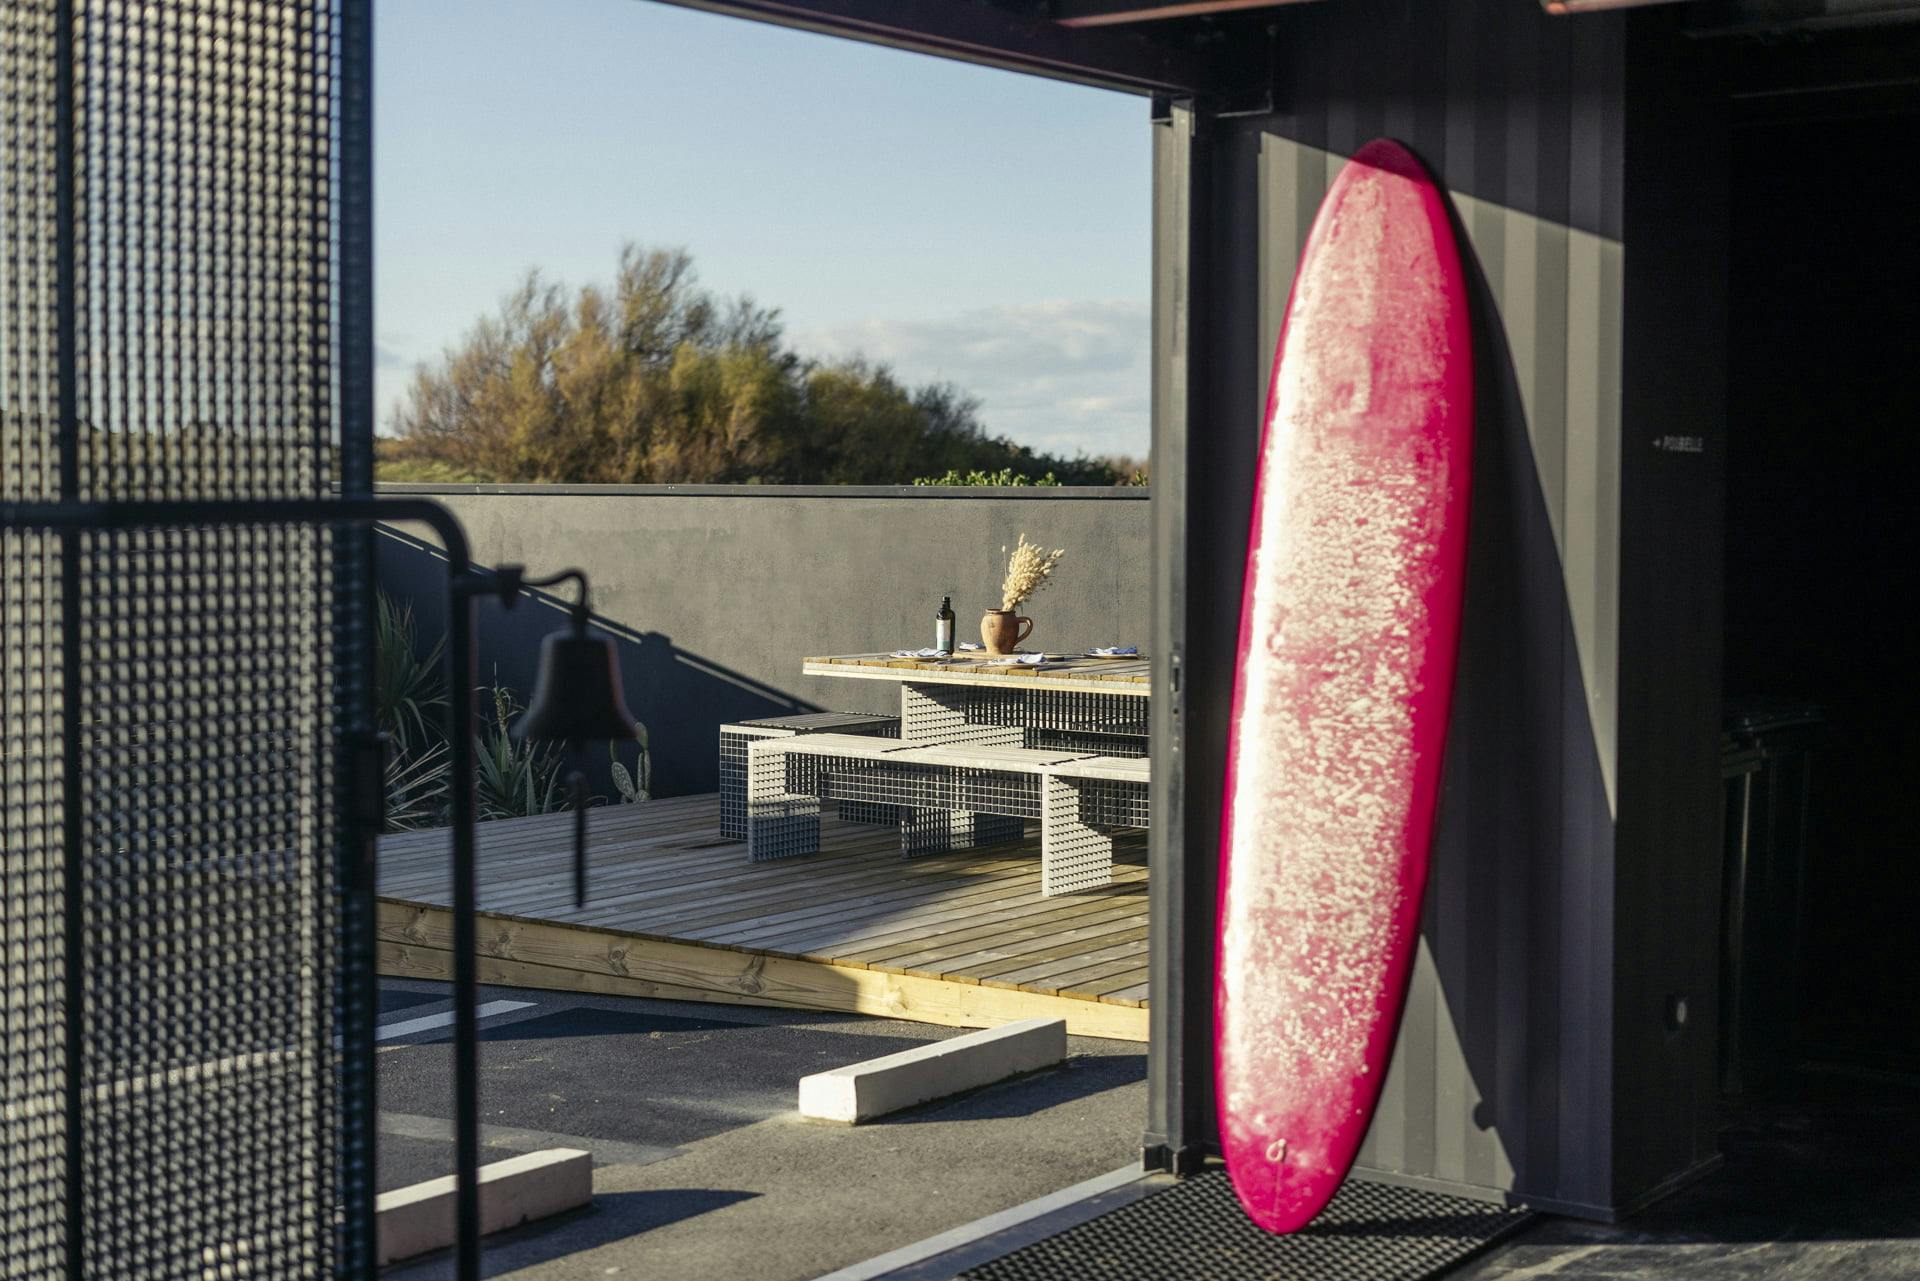 Red surfboard leaning against the wall overlooking the large outdoor terrace